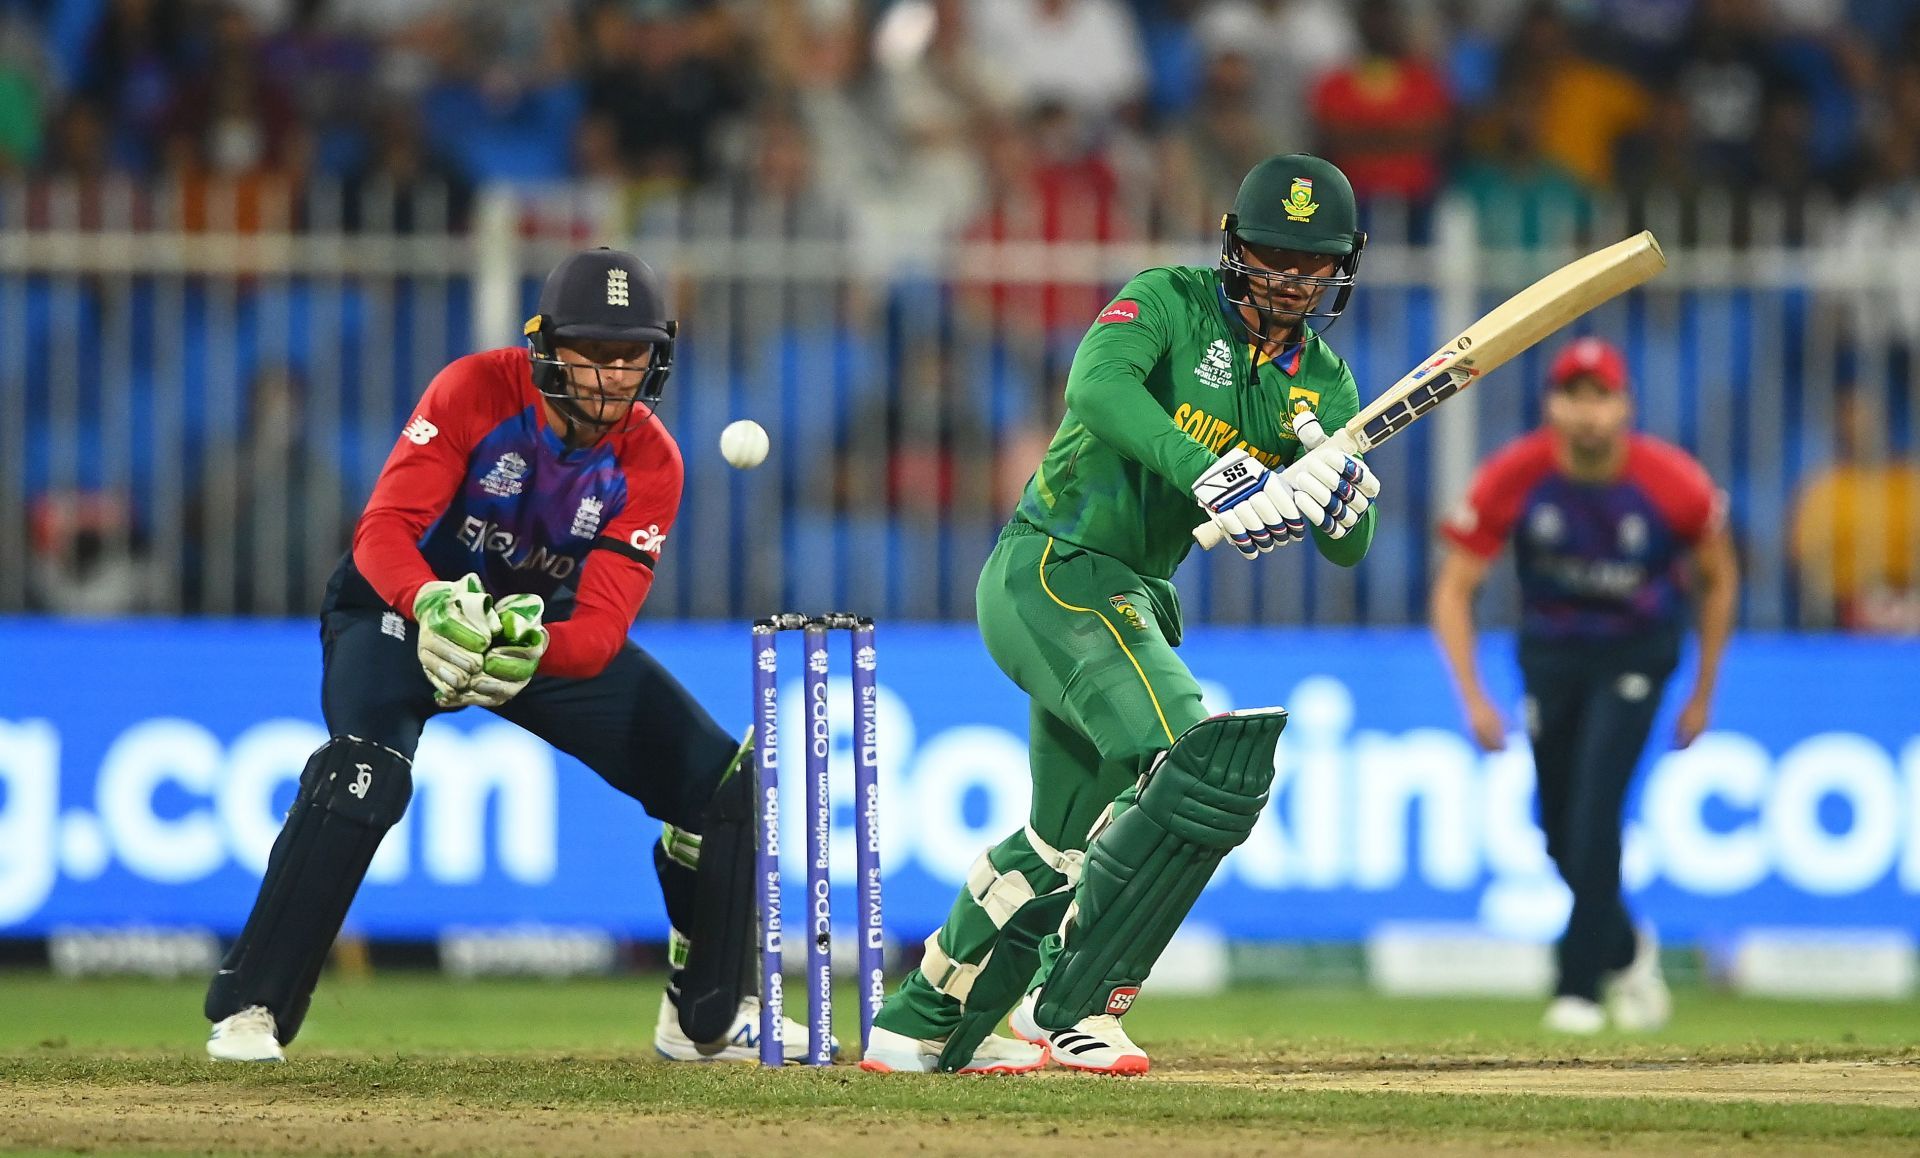 South Africa can eliminate England from the ICC T20 World Cup 2021 tonight